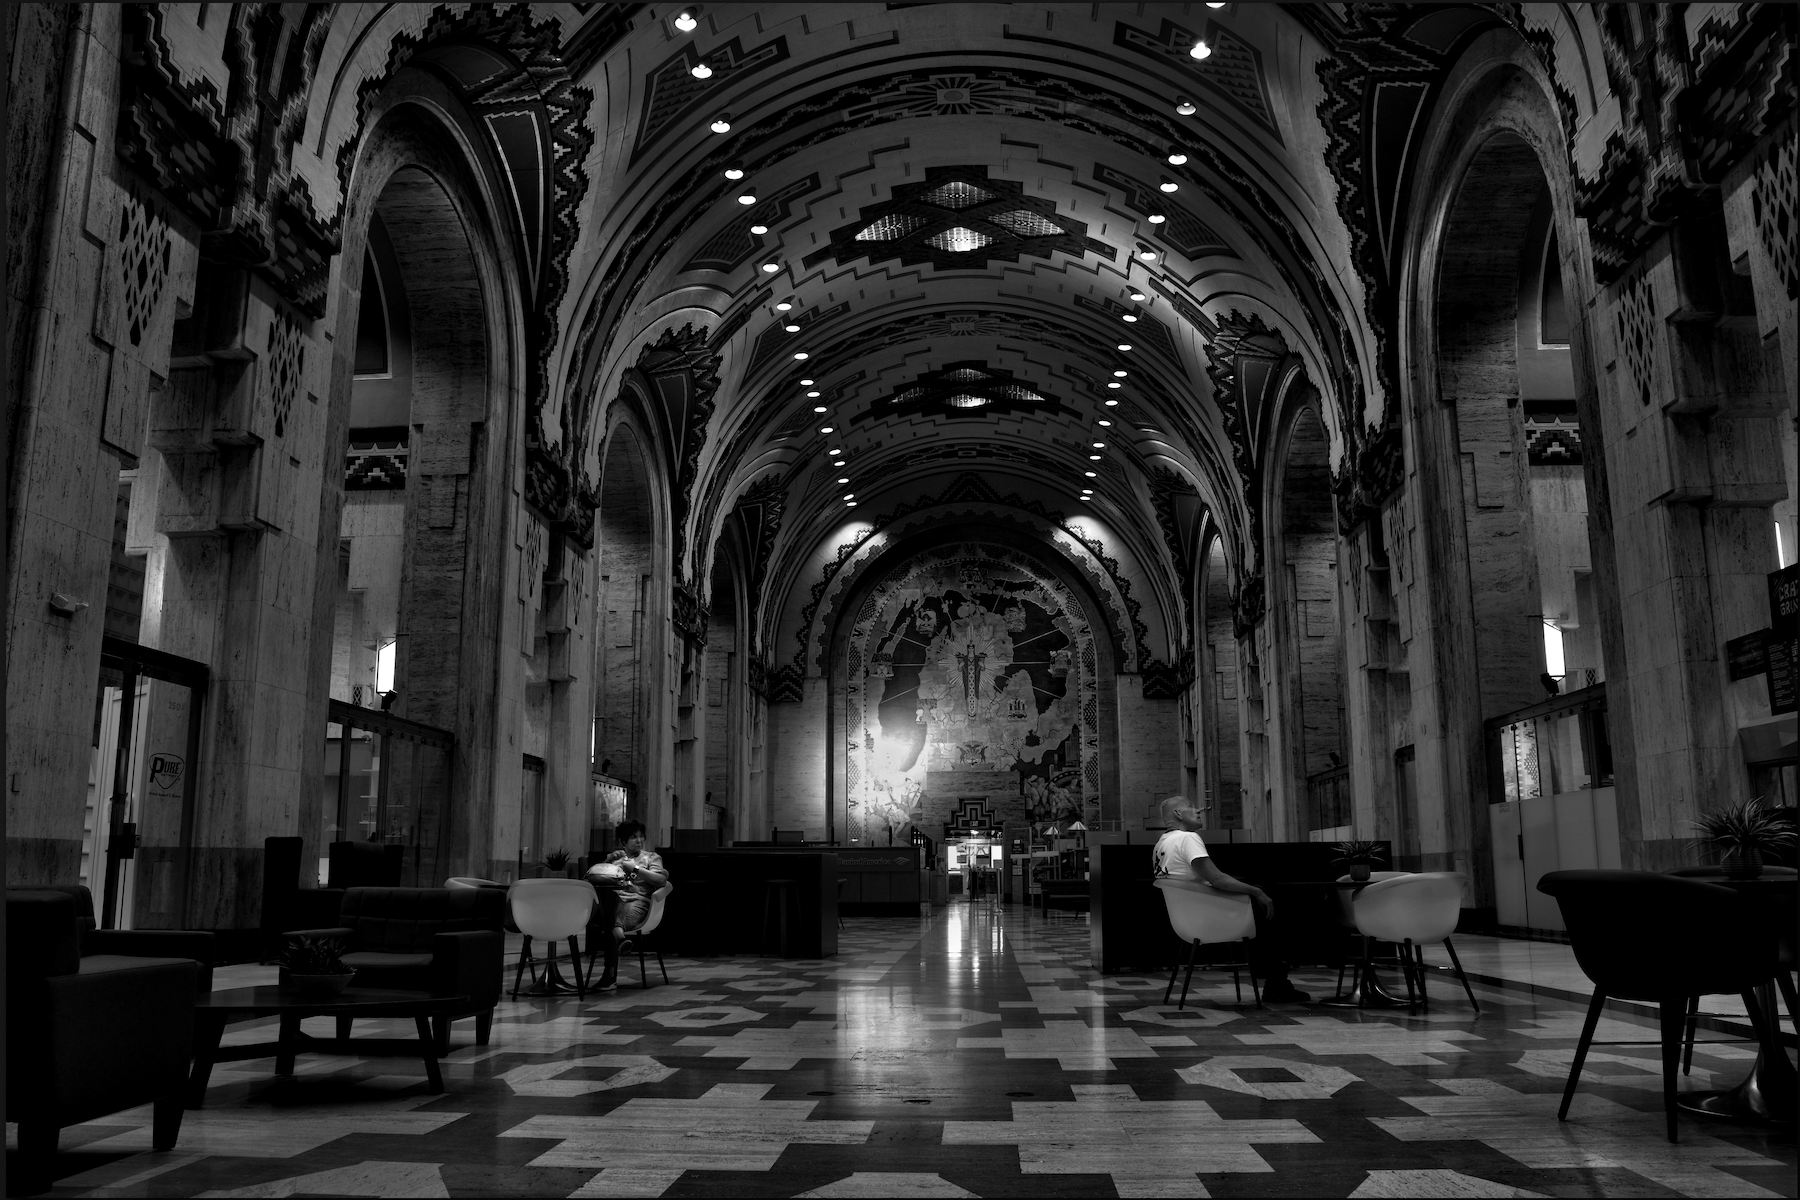 Inside the famous guardian building foyer in Detroit, Michigan.